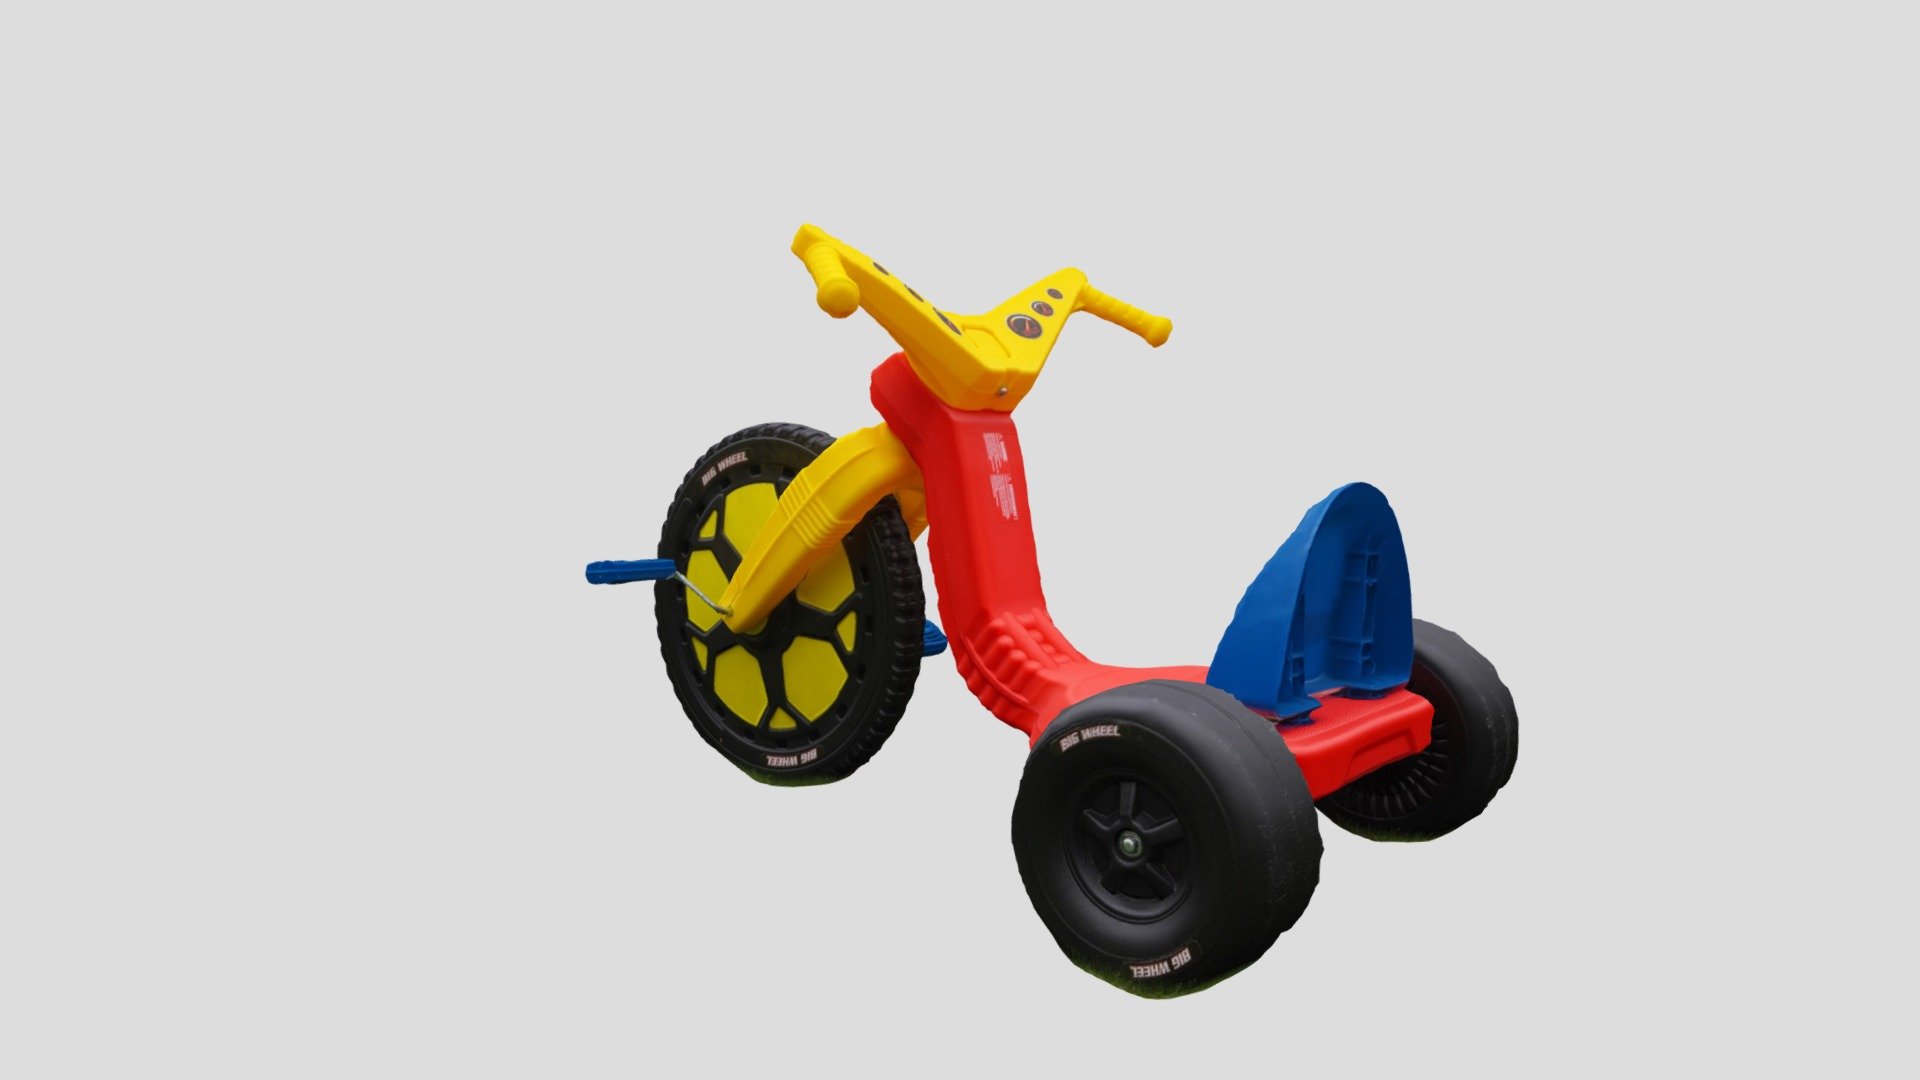 I've always wanted to build a 2x scale model of a bigwheel trike, and step one is scanning it into VR :)

Created in RealityCapture by Capturing Reality from 205 images in 00h:03m:31s 3d model